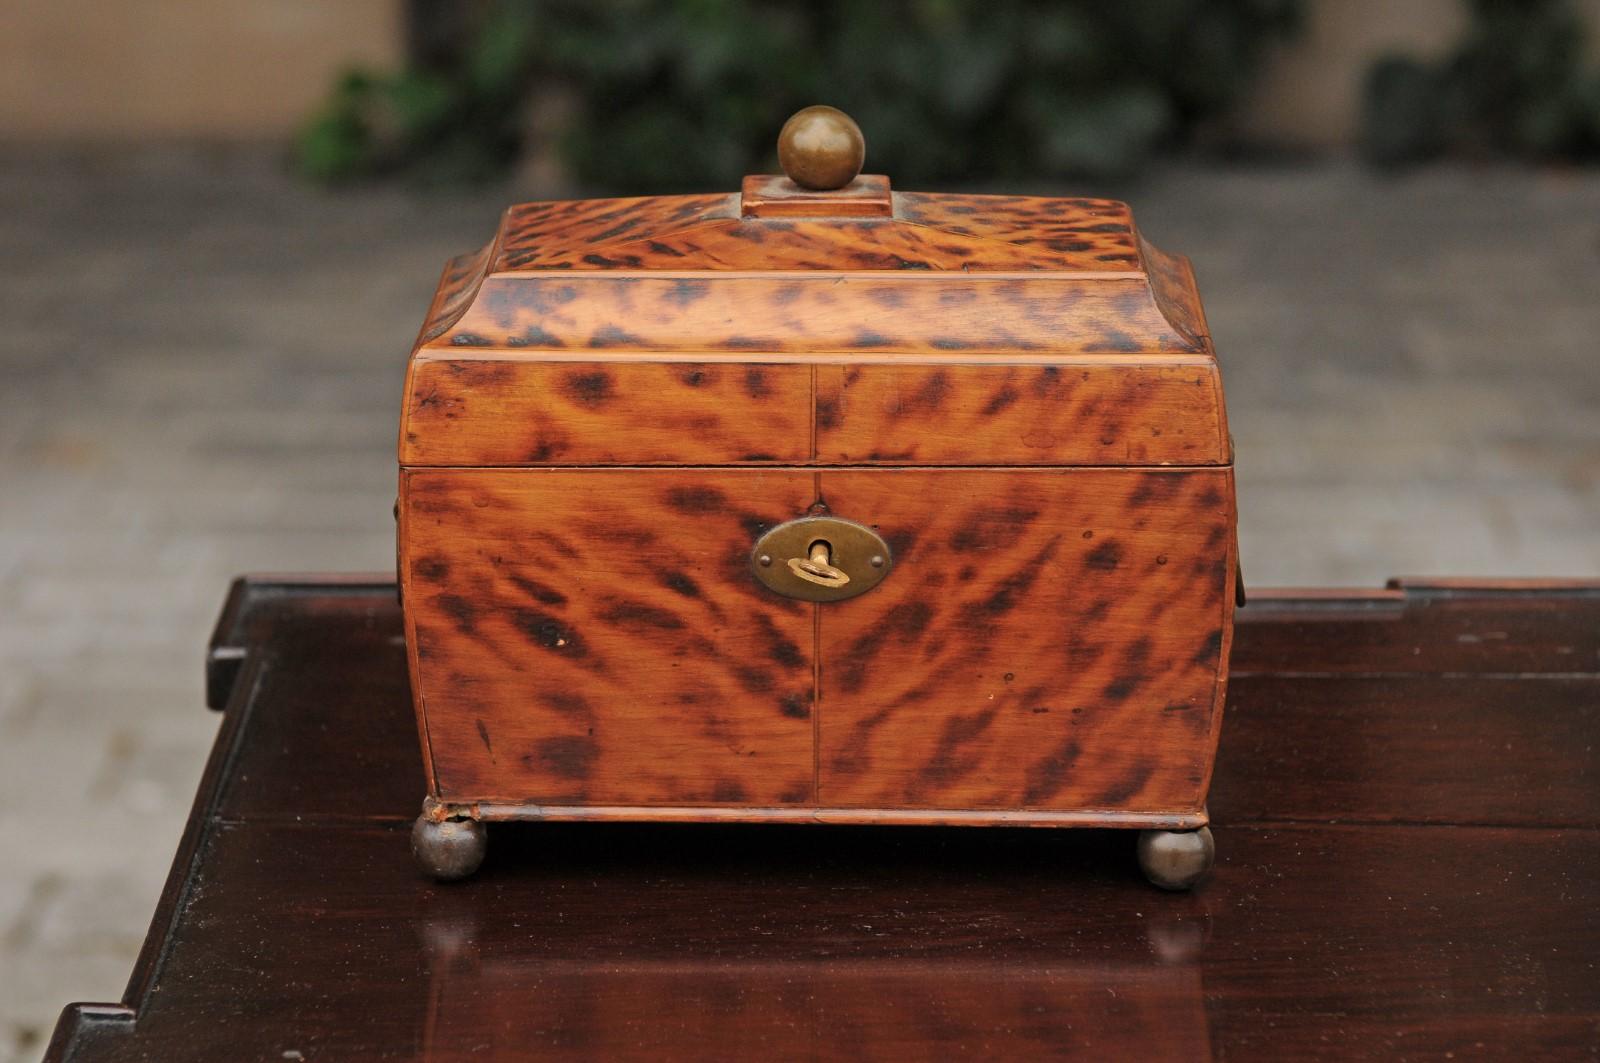 An English Victorian tea caddy from the late 19th century, with faux painted tortoise finish and patinated brass accents. Born during the third quarter of the 19th century during the reign of Queen Victoria, this English tea caddy features an